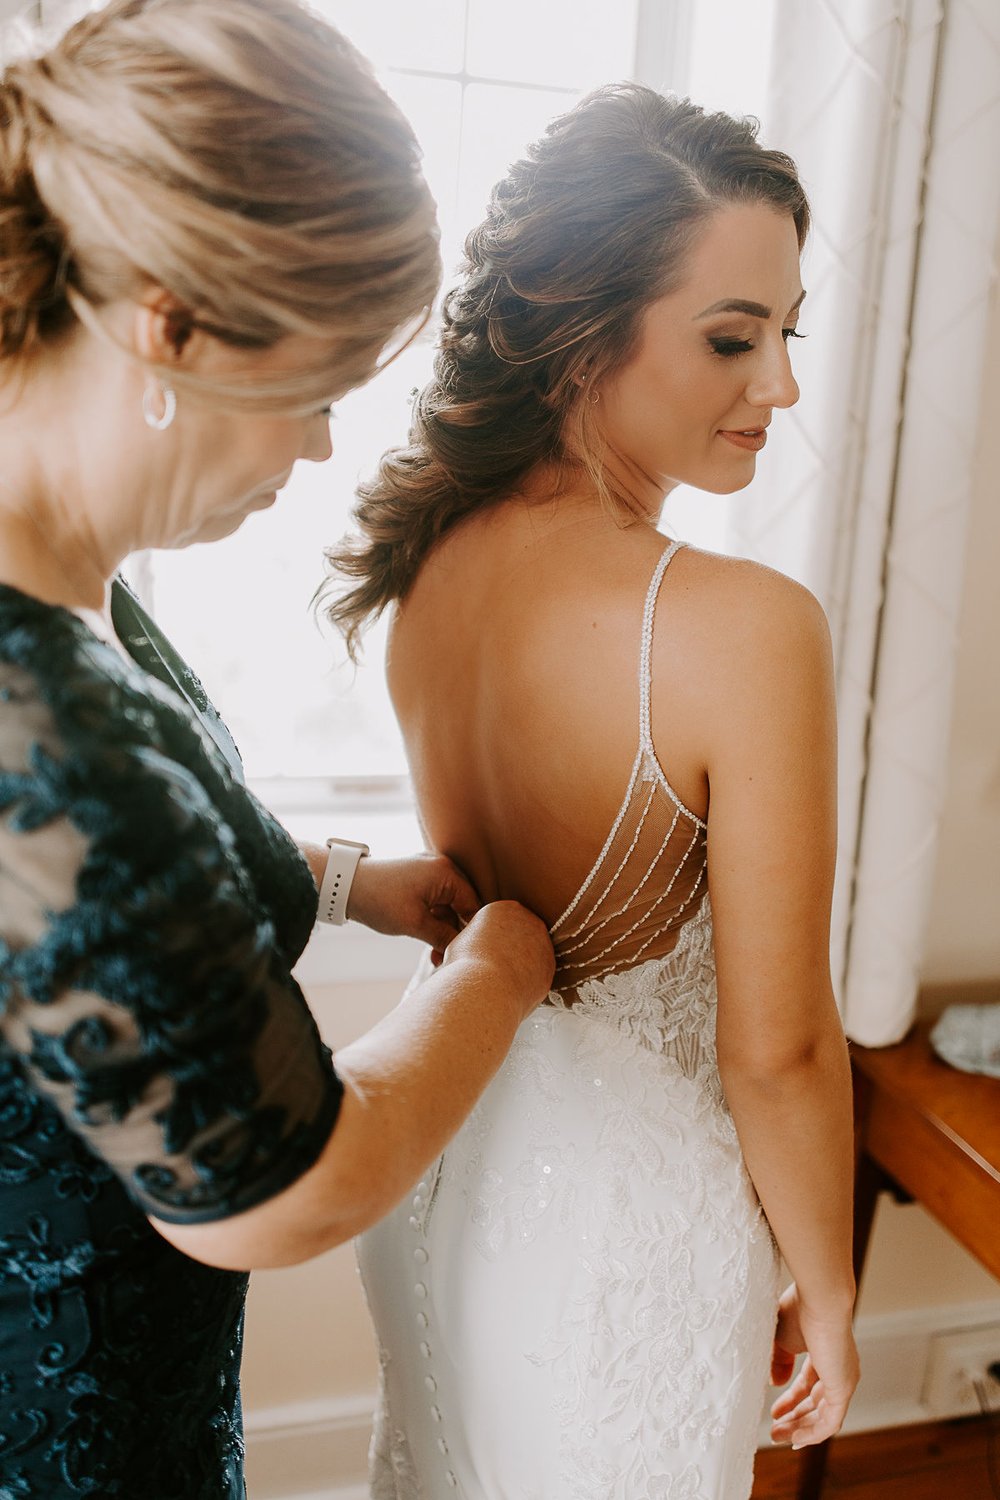 Bride has wedding dress zipped up while getting ready for wedding